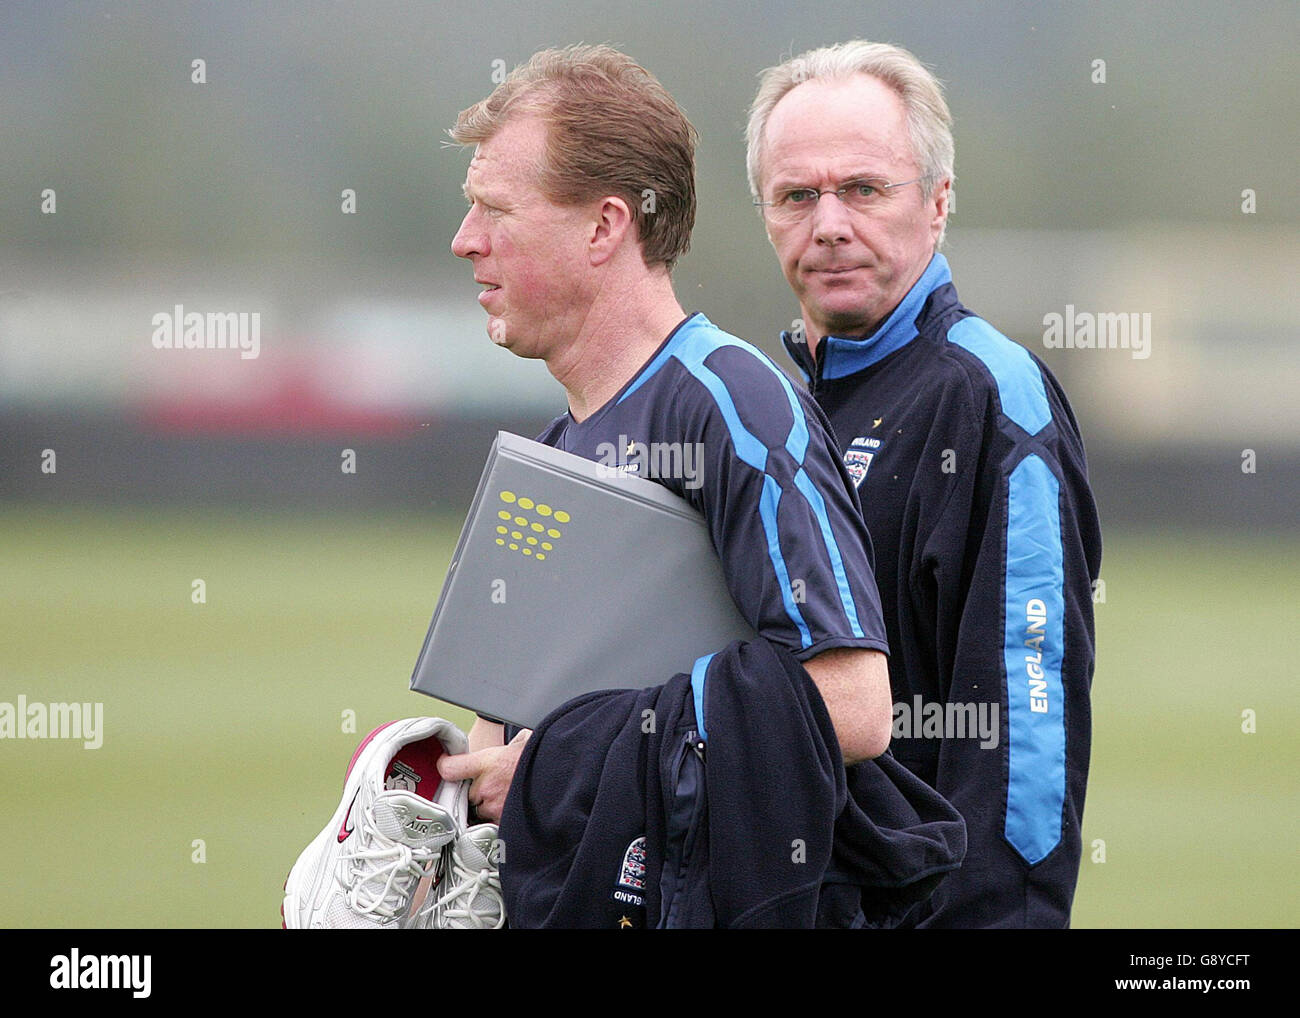 England manager Sven-Goran Eriksson (R) and coach Steve McClaren during a training session at Carrington, Manchester, Tuesday October 11, 2005, ahead of their World Cup qualifying match against Poland tomorrow evening. PRESS ASSOCIATION Photo. Photo credit should read: Martin Rickett/PA. Stock Photo